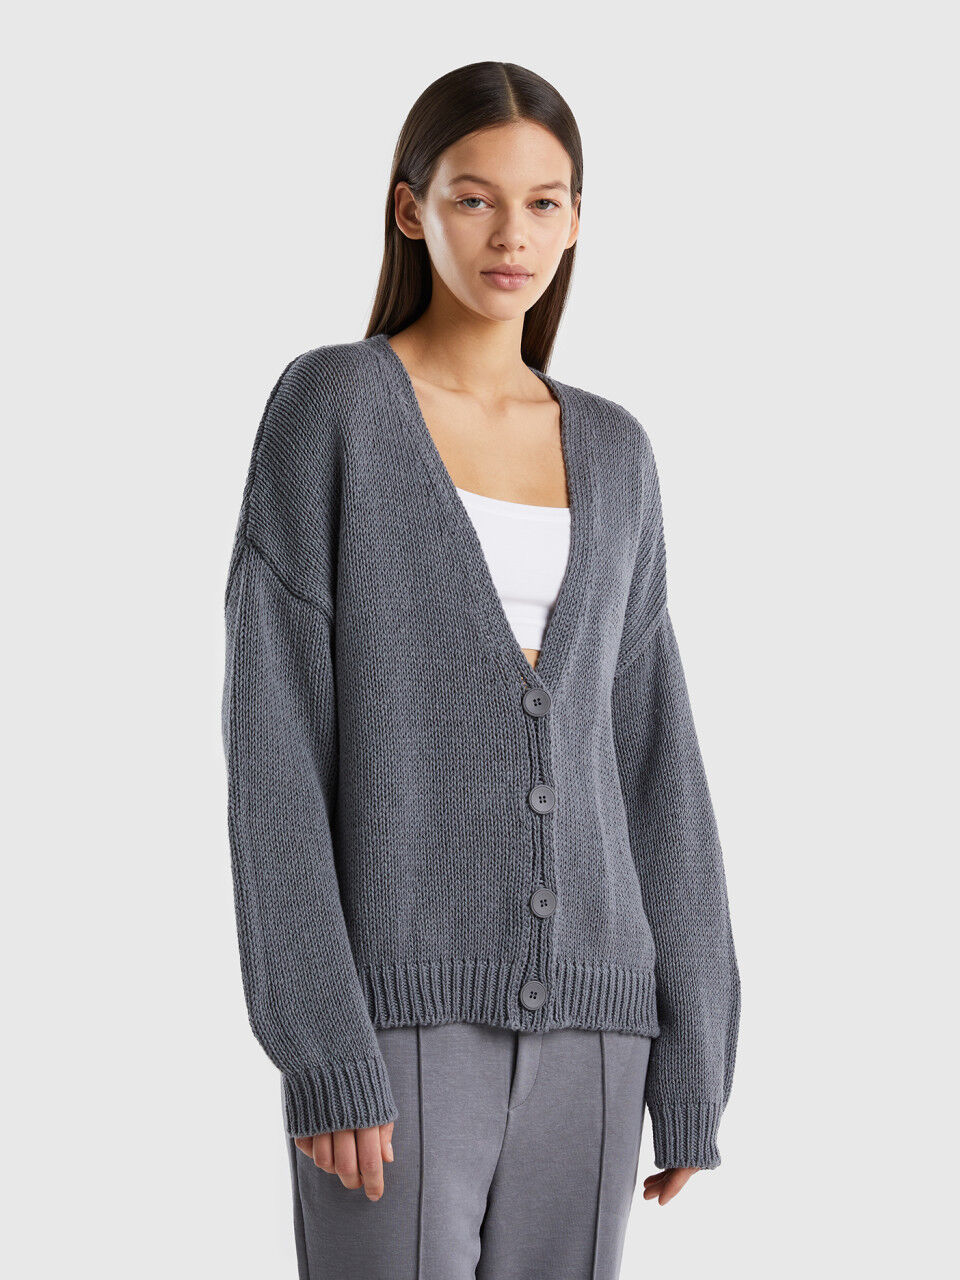 Cardigan in cotton blend